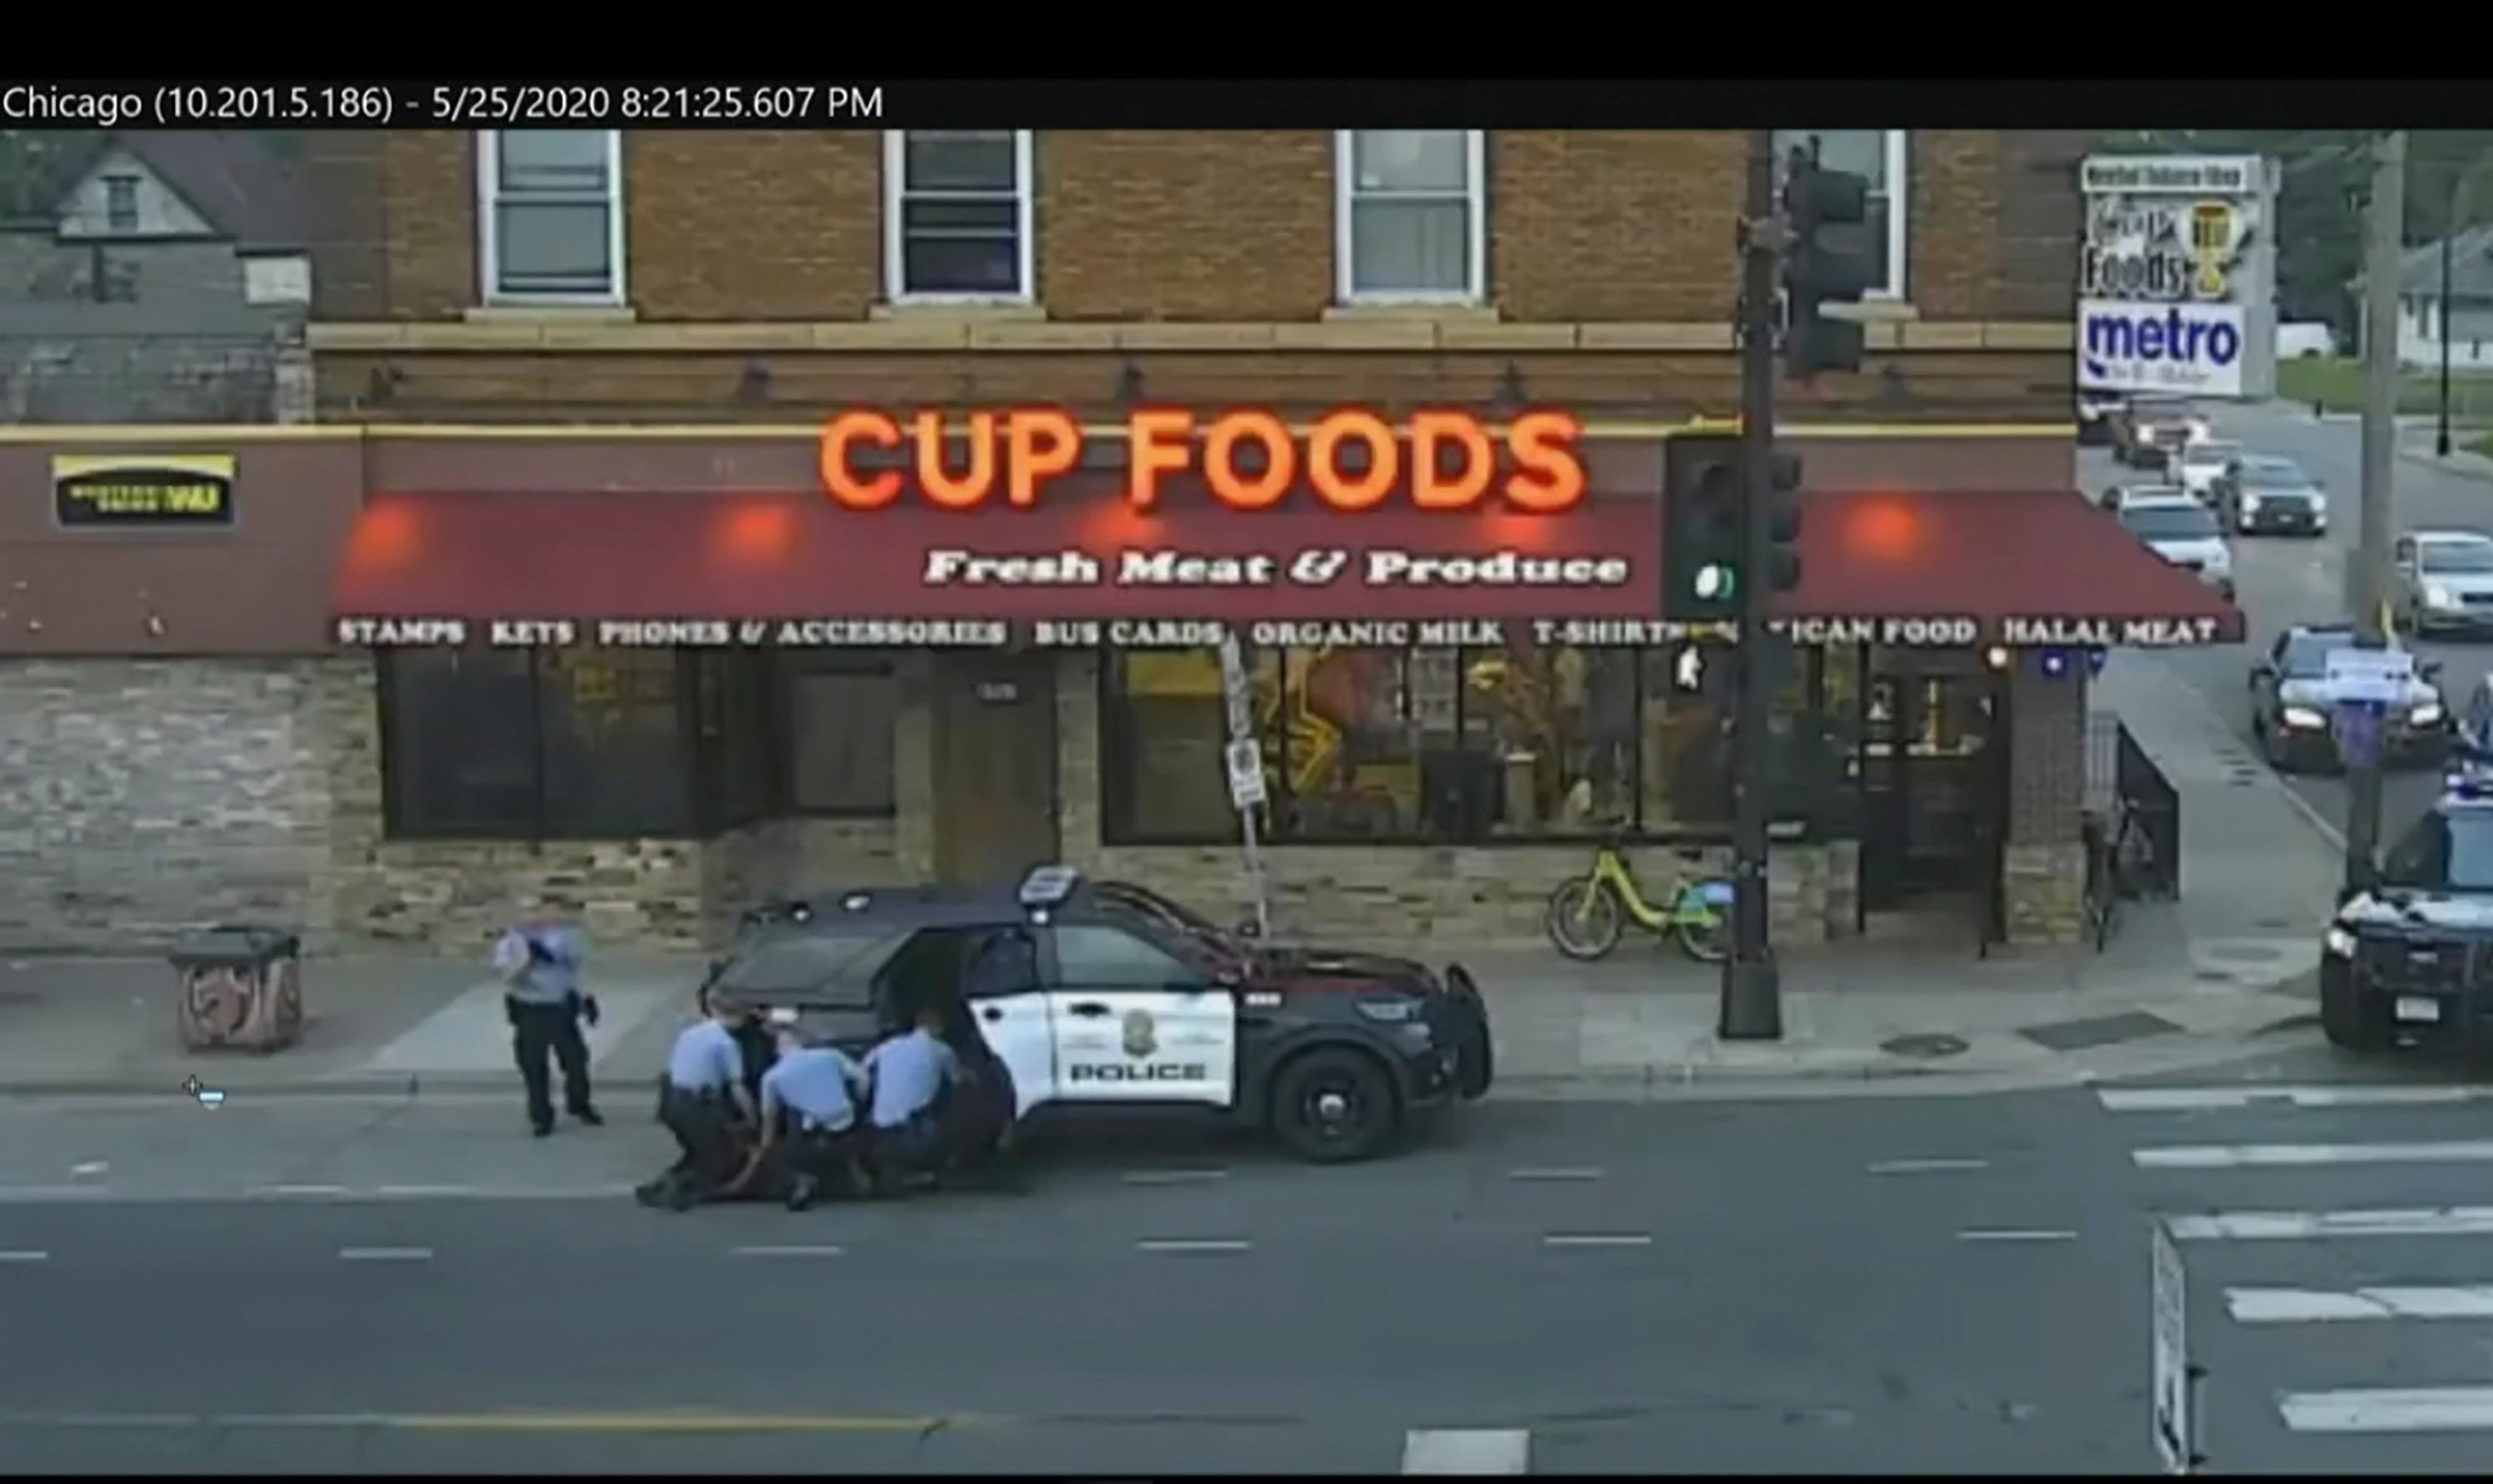 A city-operated security camera shows officers kneeling on George Floyd’s back during his fatal arrest.